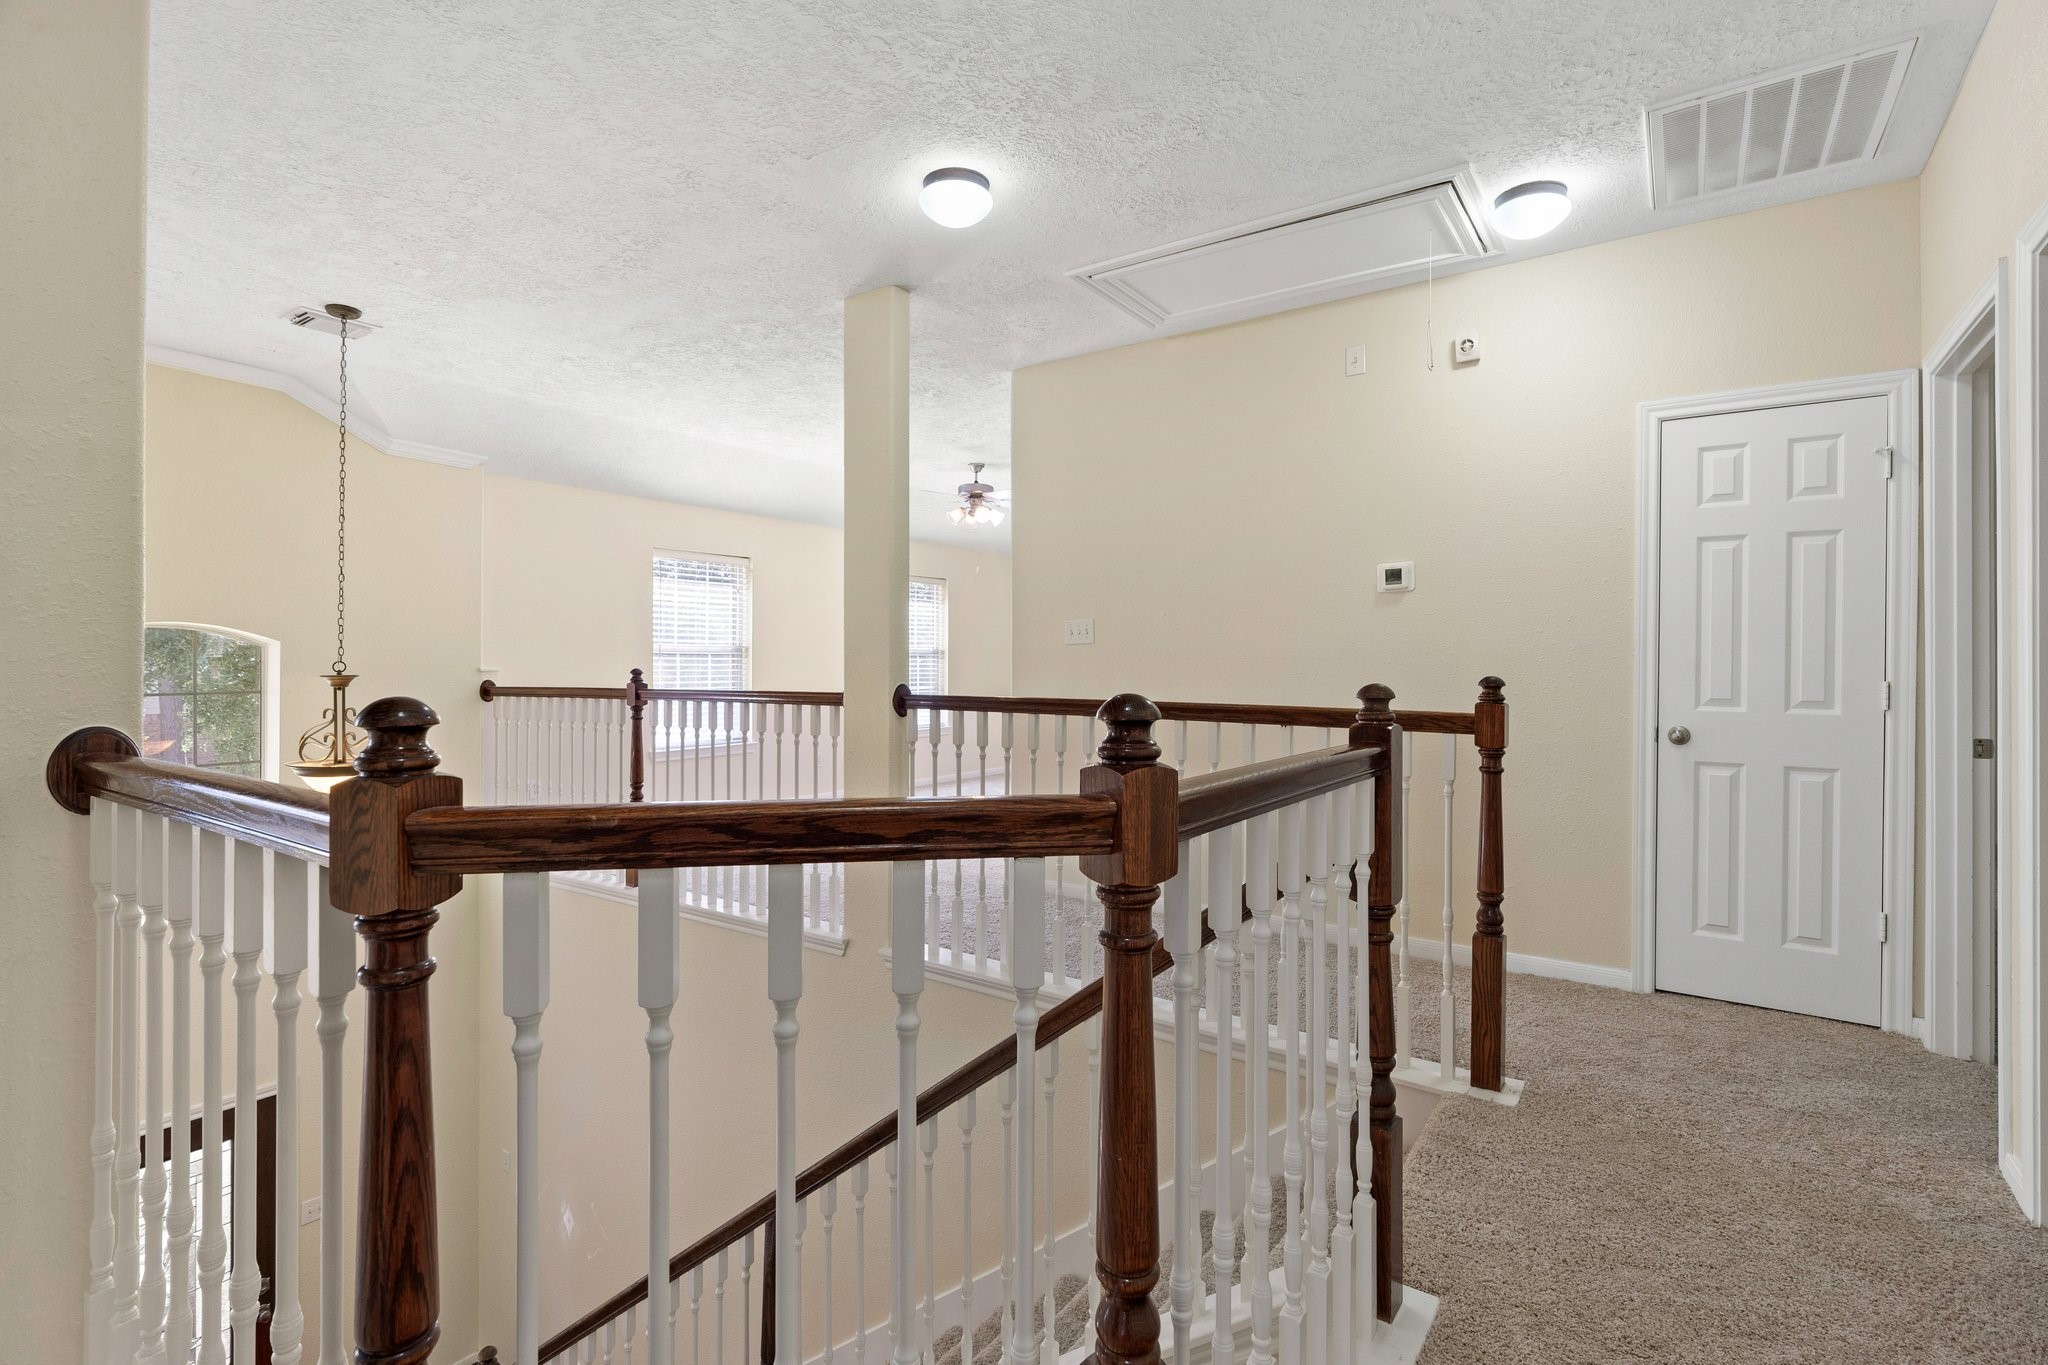 This is the hall upstairs with the game room at the front of the home and the door you see closed is to a linen closet.